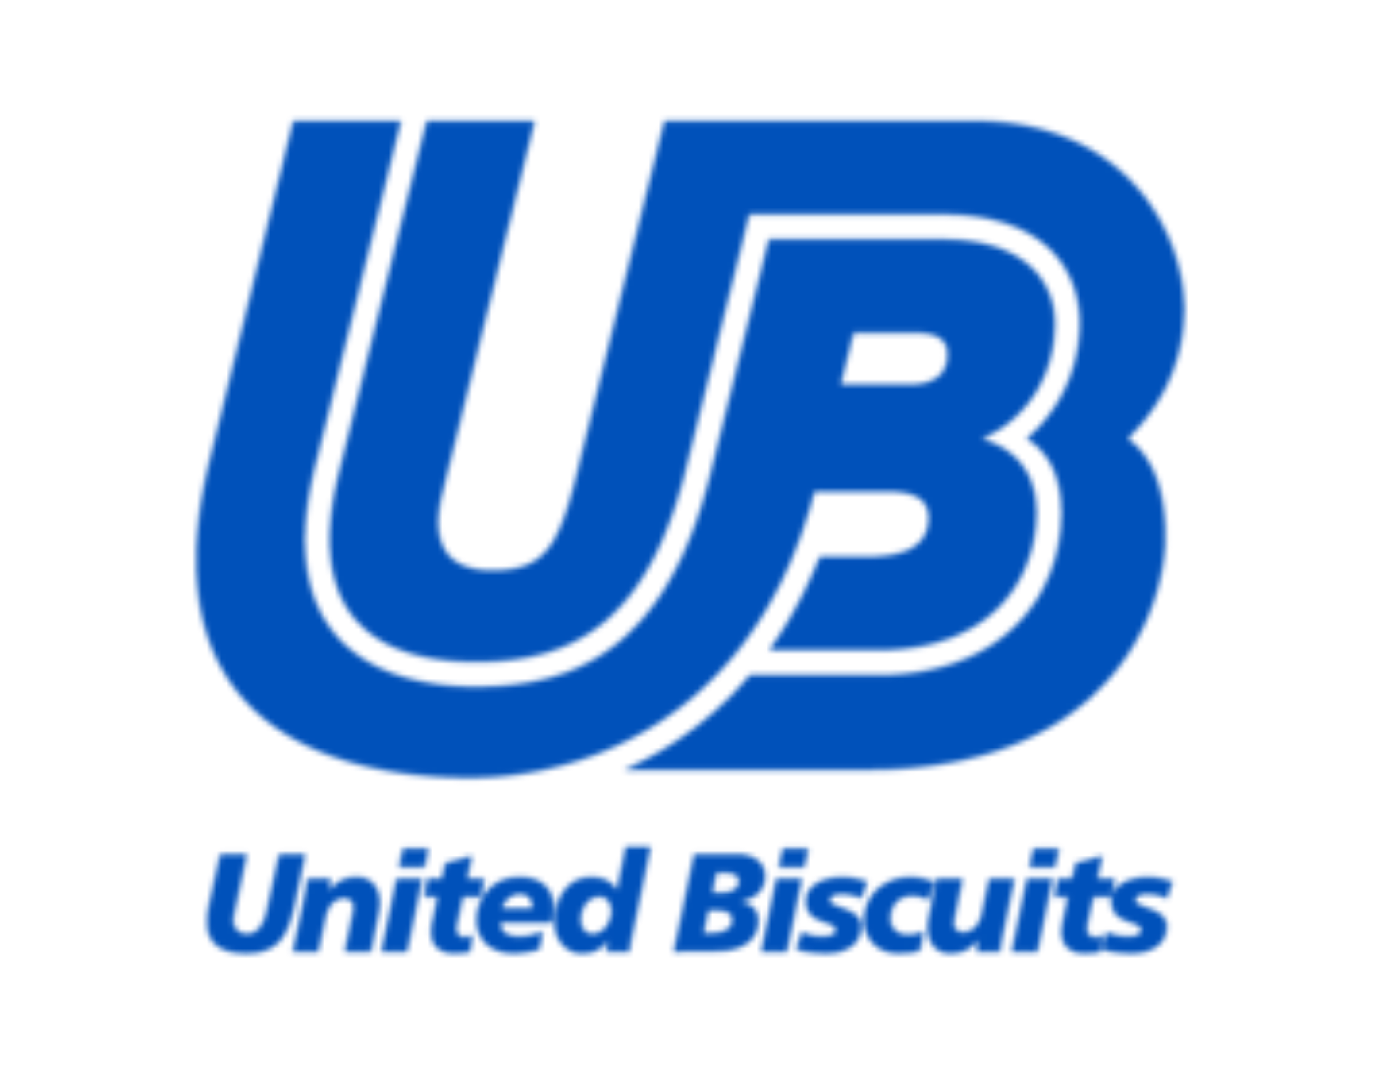 United Biscuits